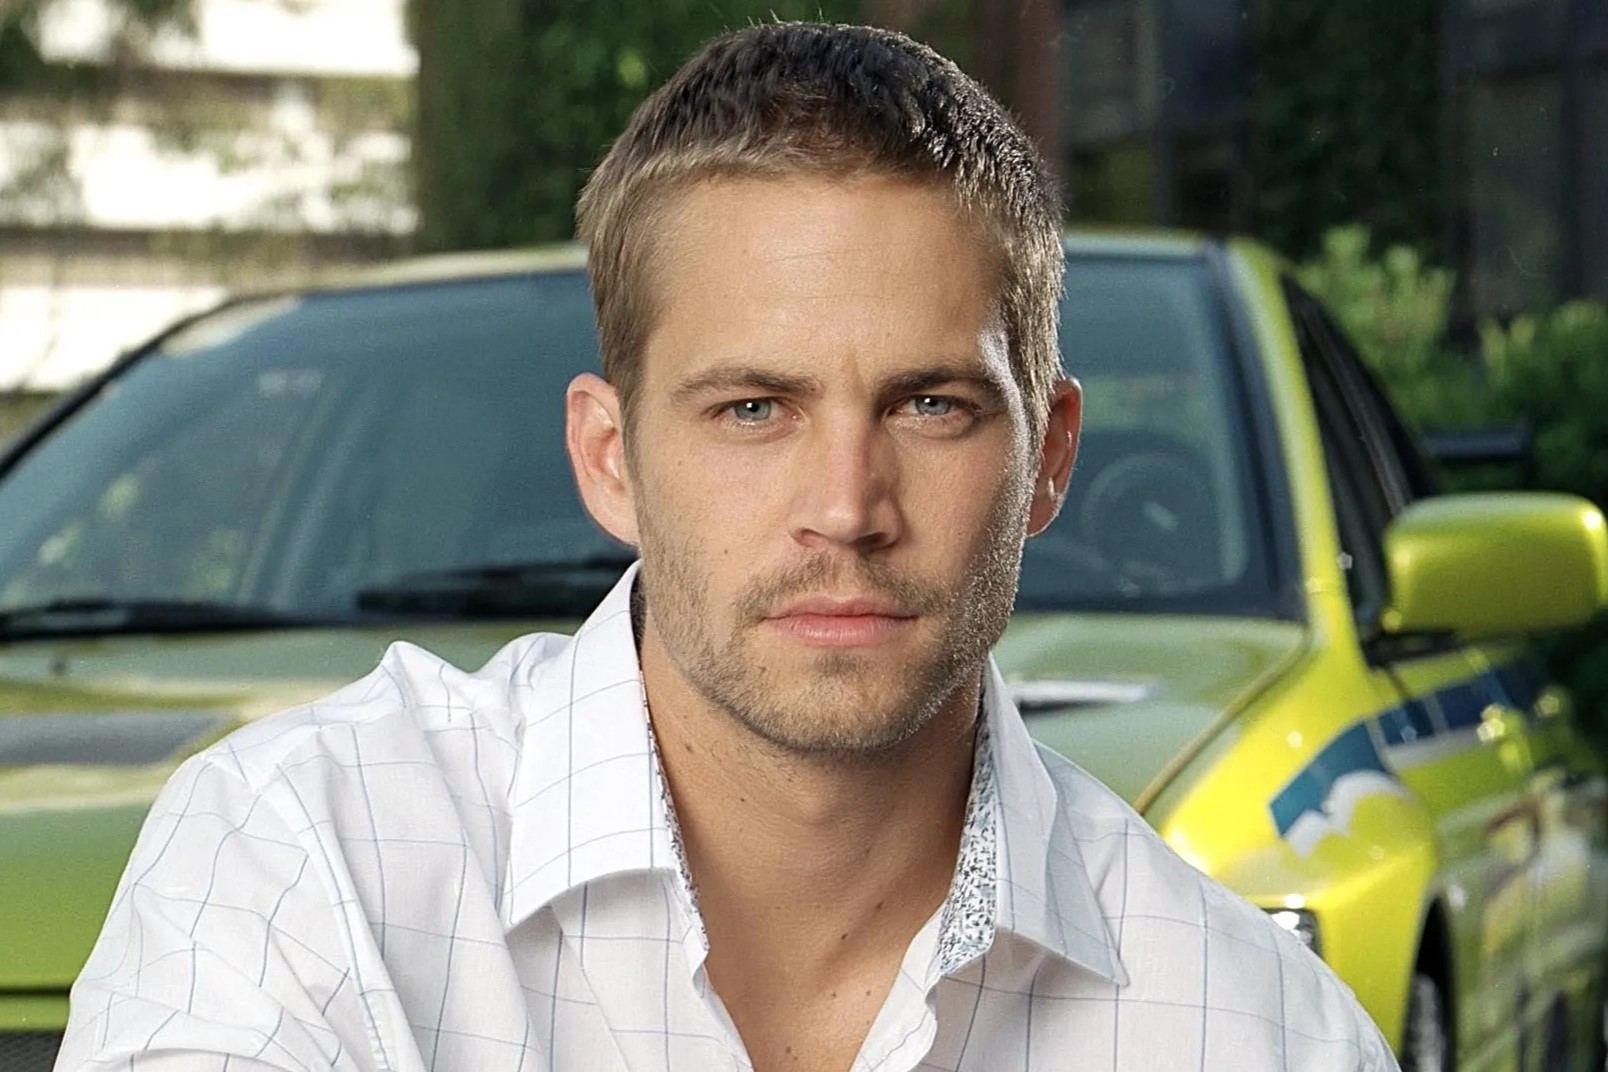 The Shocking Truth Behind Paul Walker’s Fatal Accident